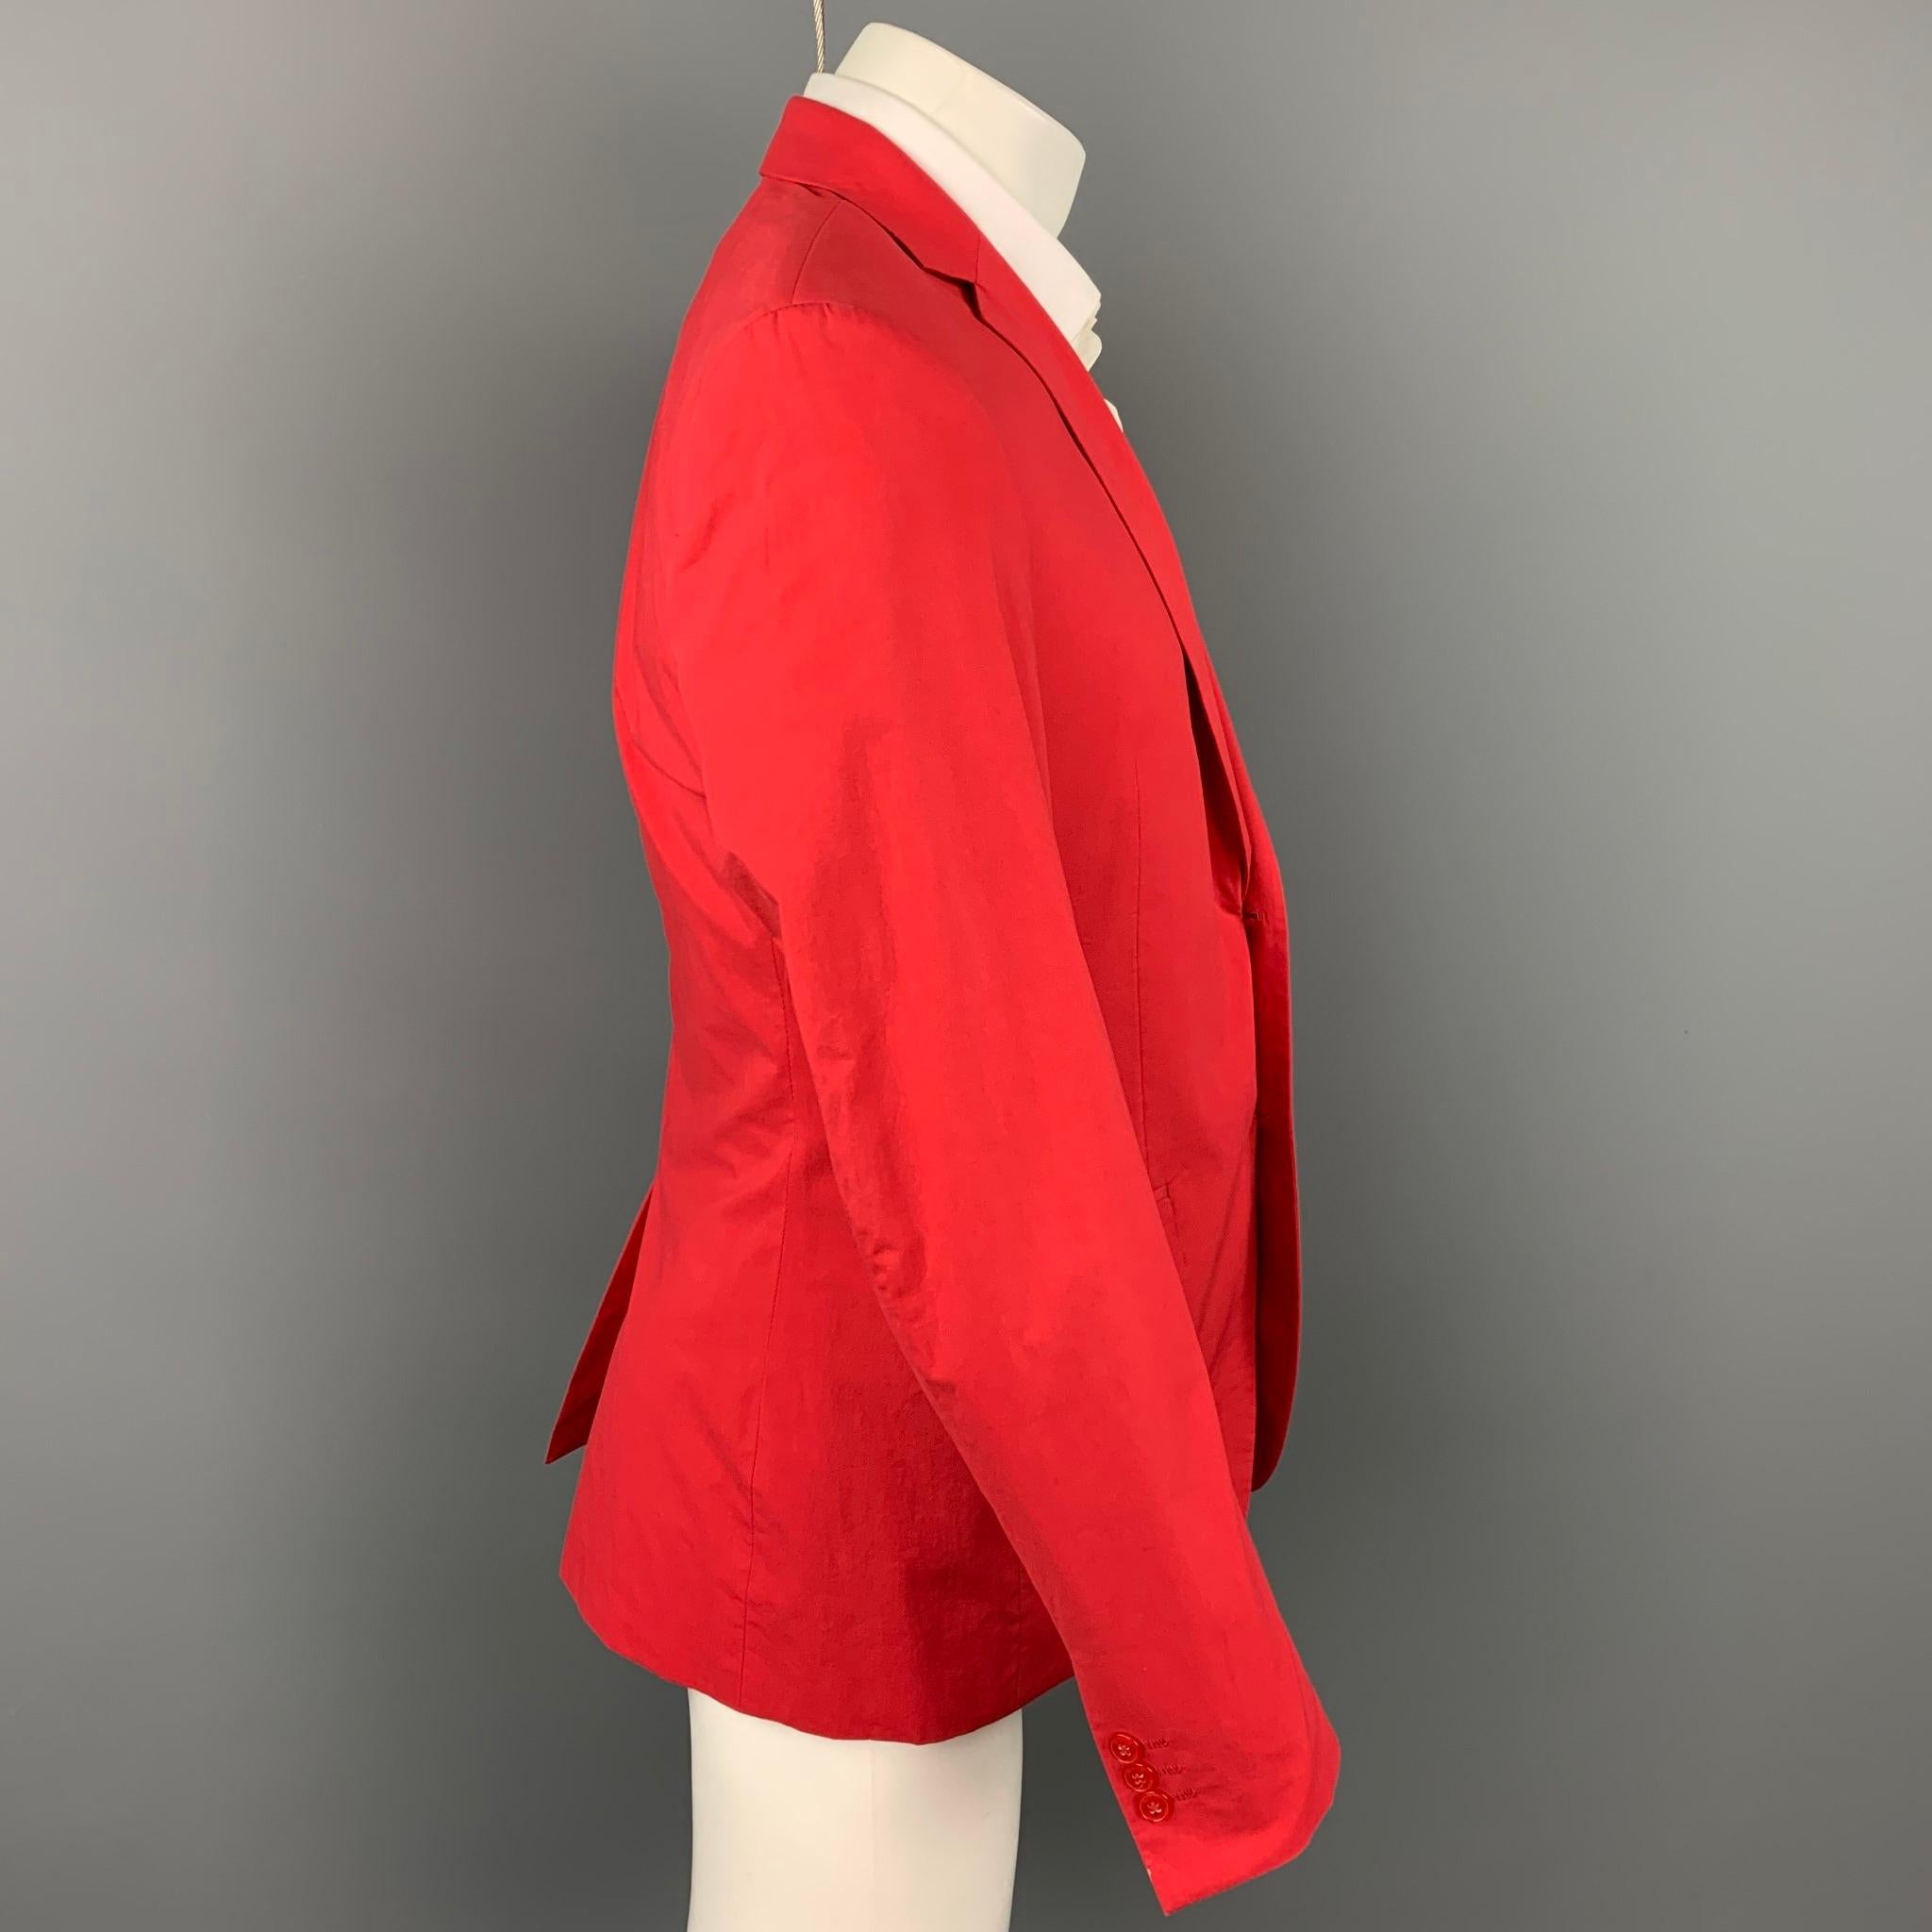 VERSACE COLLECTION sport coat comes in a red cotton with a full print liner featuring a notch lapel, flap pockets, and a two button closure. Made in Romania.

Very Good Pre-Owned Condition.
Marked: 50

Measurements:

Shoulder: 18 in.
Chest: 40